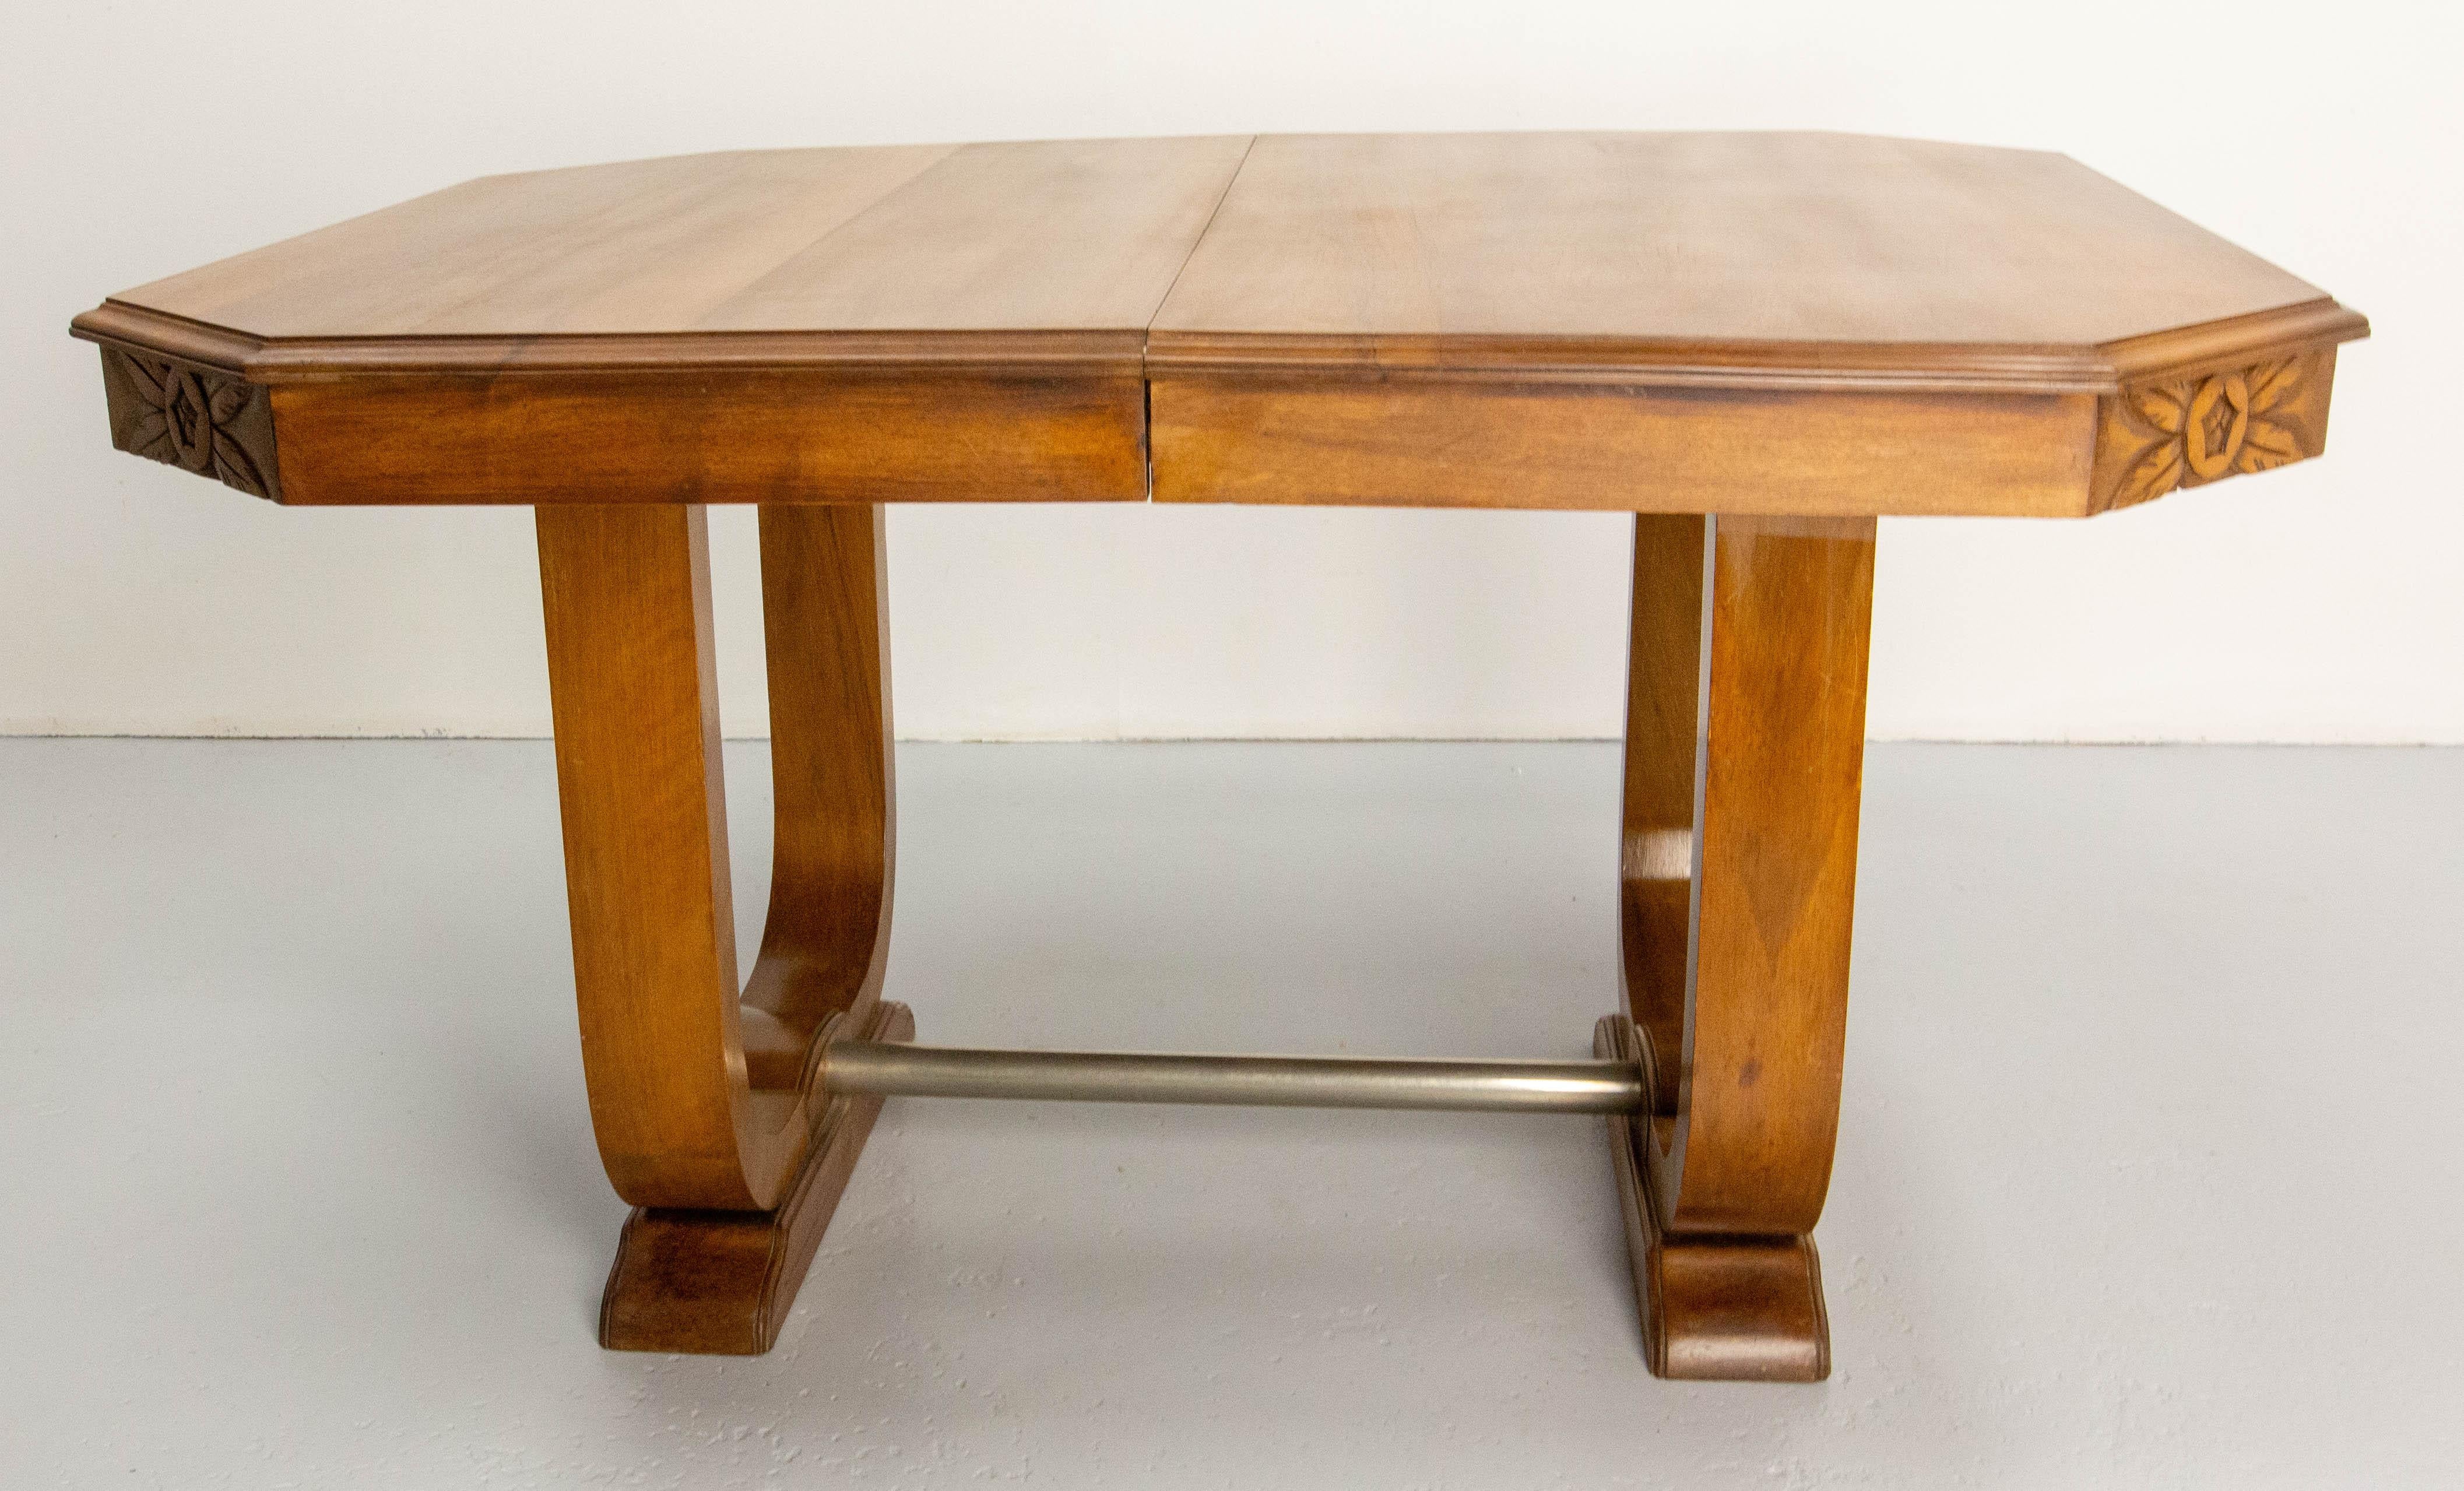 Dining Walnut Table with Central Extension  Art Déco Period, circa 1930 France For Sale 1